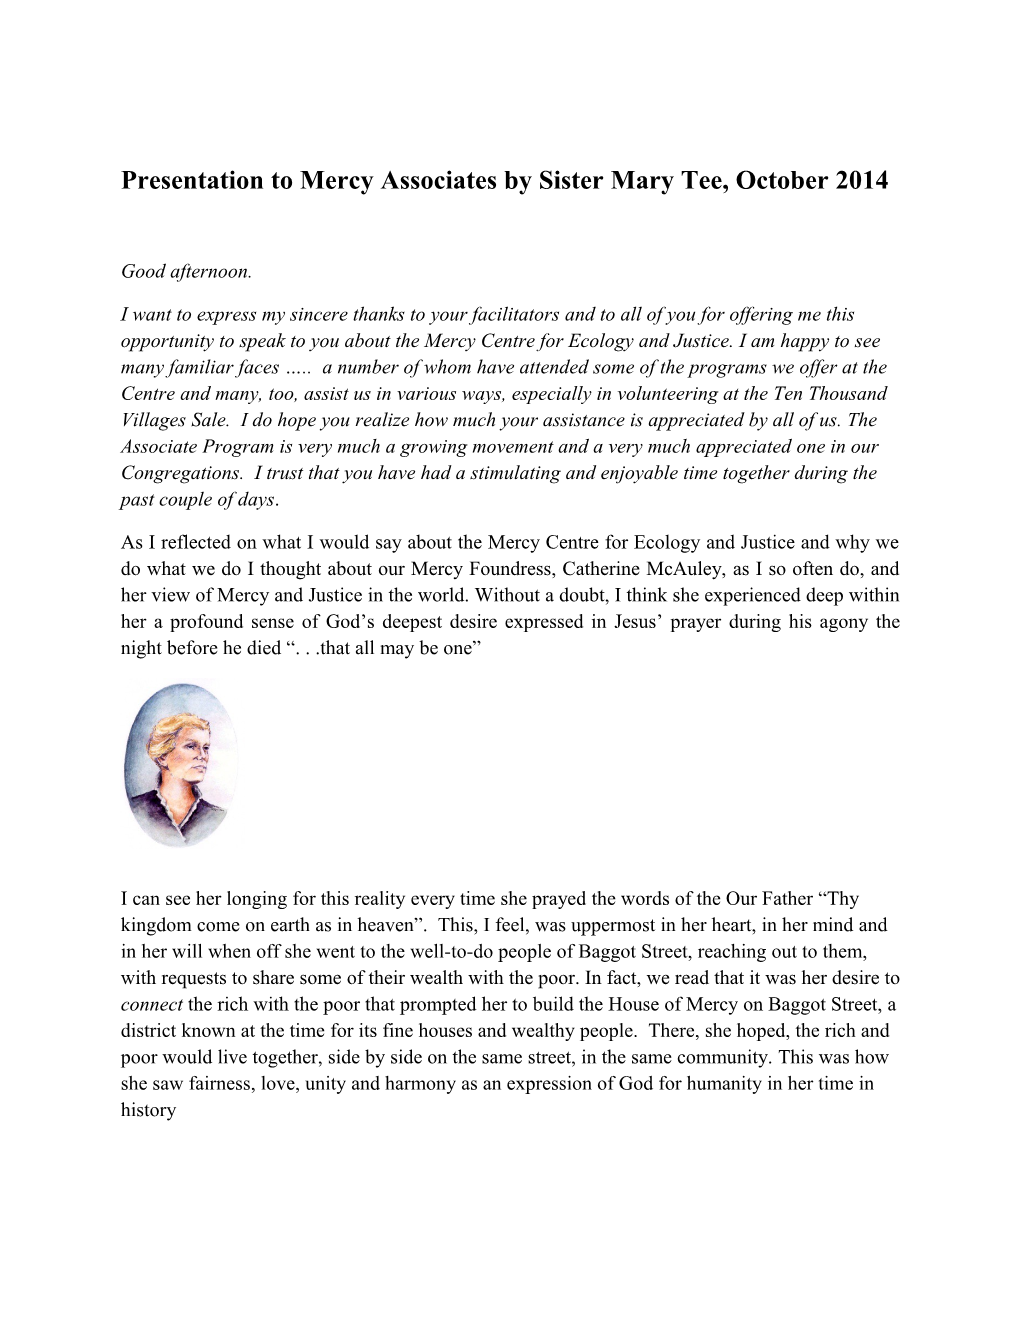 Presentation to Mercy Associates by Sister Mary Tee, October 2014